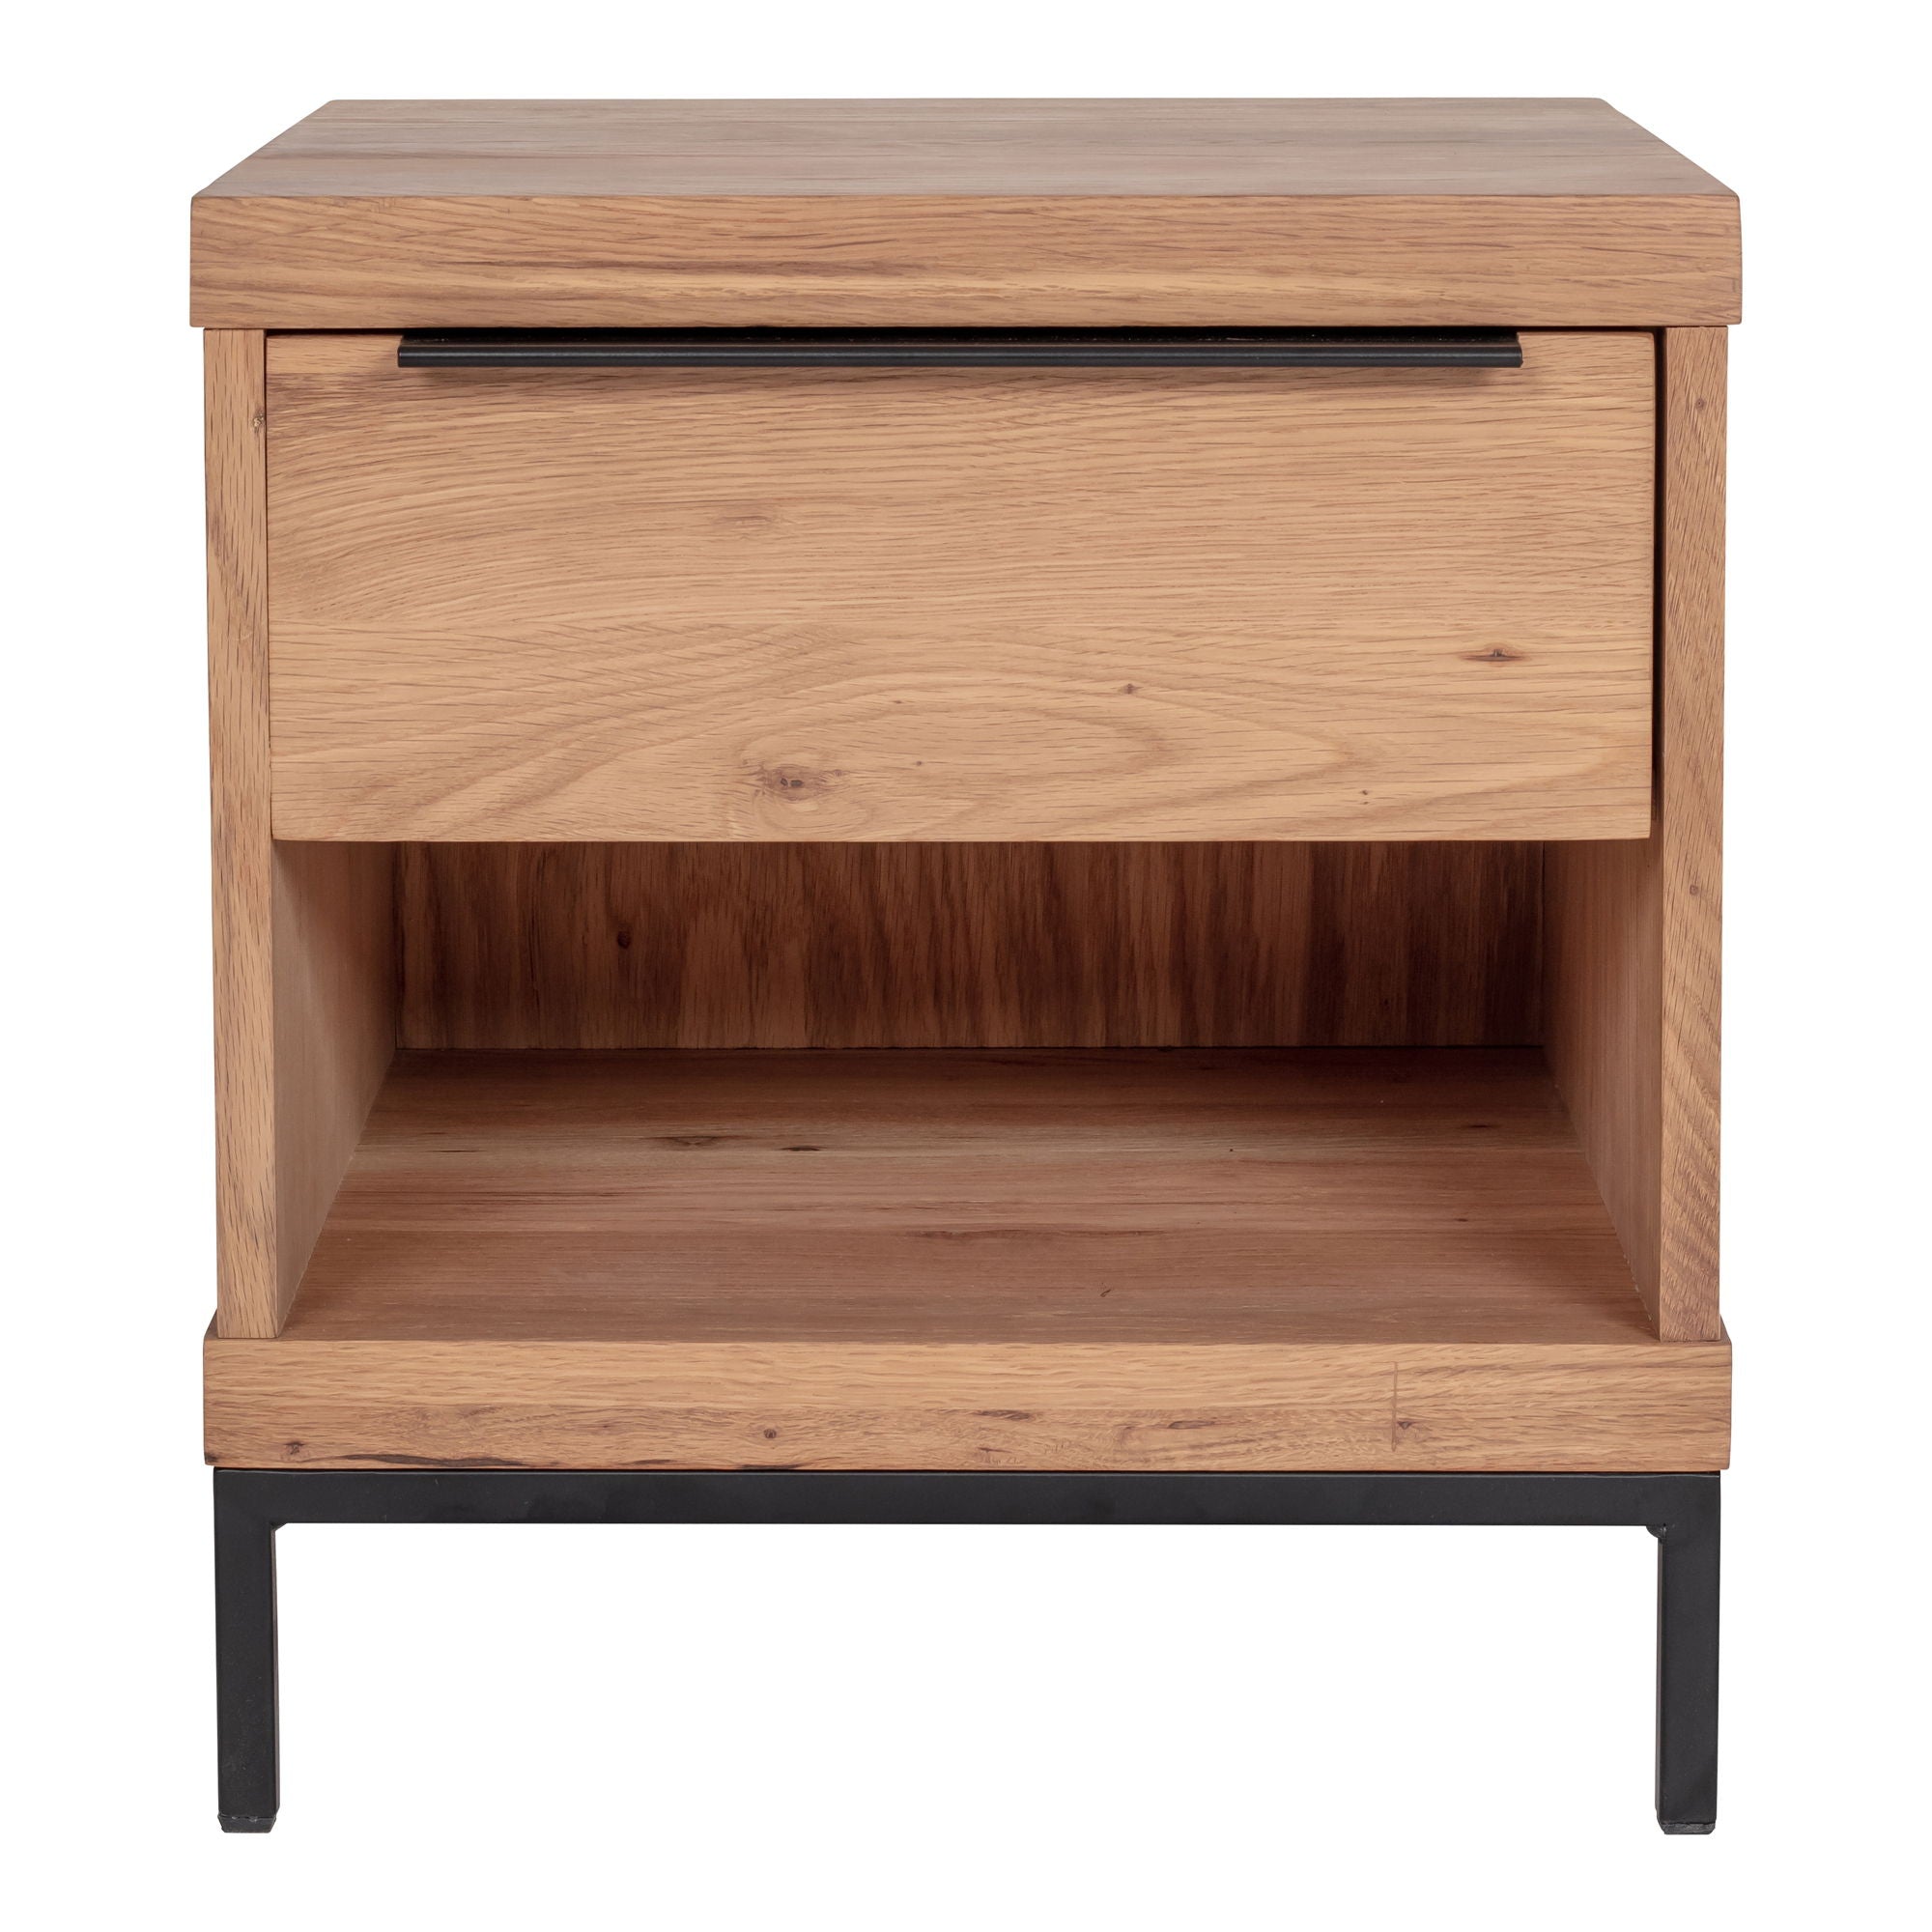 Montego - One Drawer Nightstand - Natural